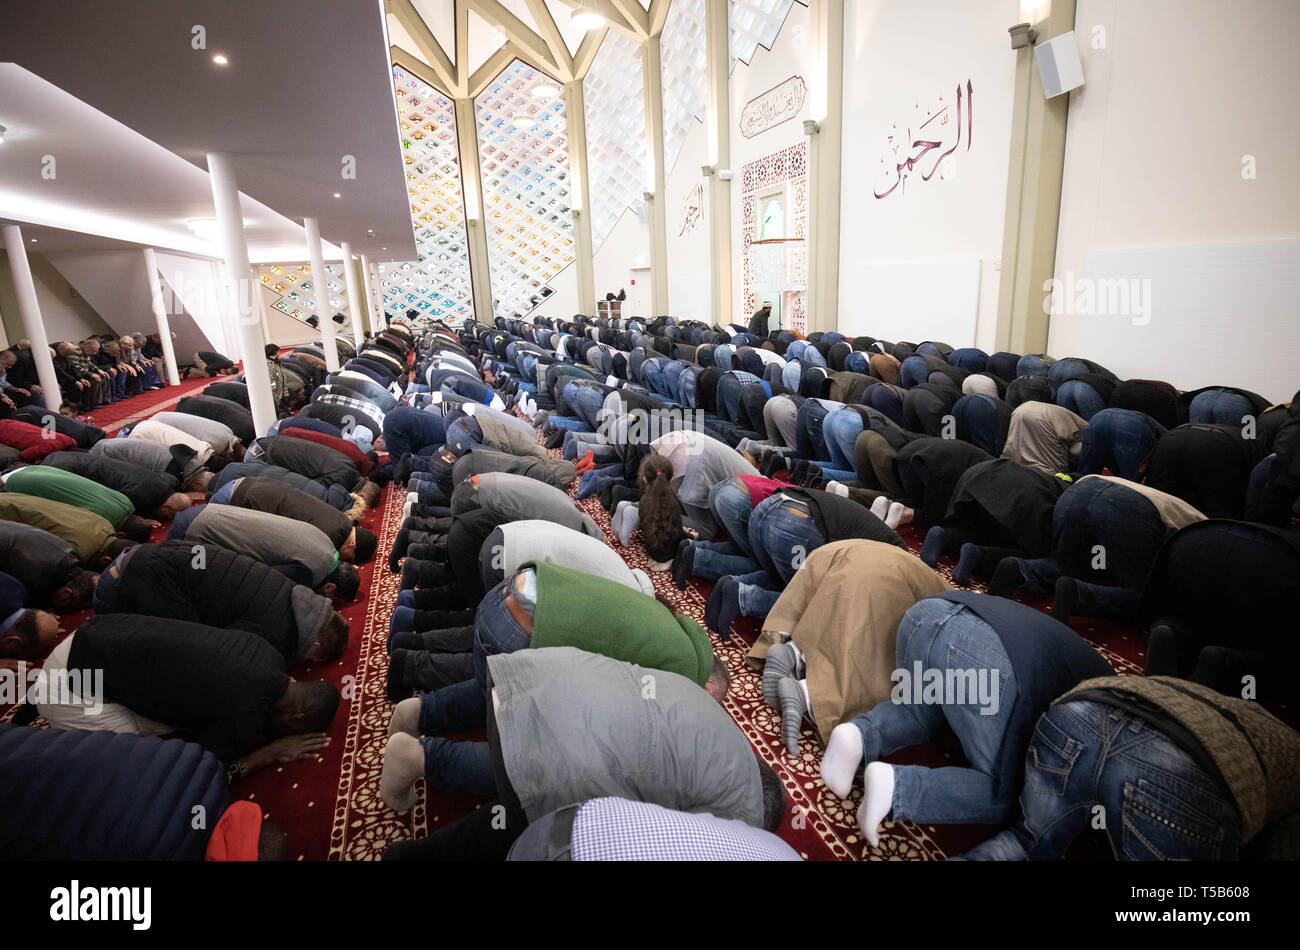 29 March 2019, Hamburg: Muslims pray during Friday prayers in the Al-Nour Mosque in the Hamburg Horn district. The mosque was rebuilt from the former Protestant Capernaum church and was opened in September 2018. Photo: Christian Charisius/dpa Stock Photo